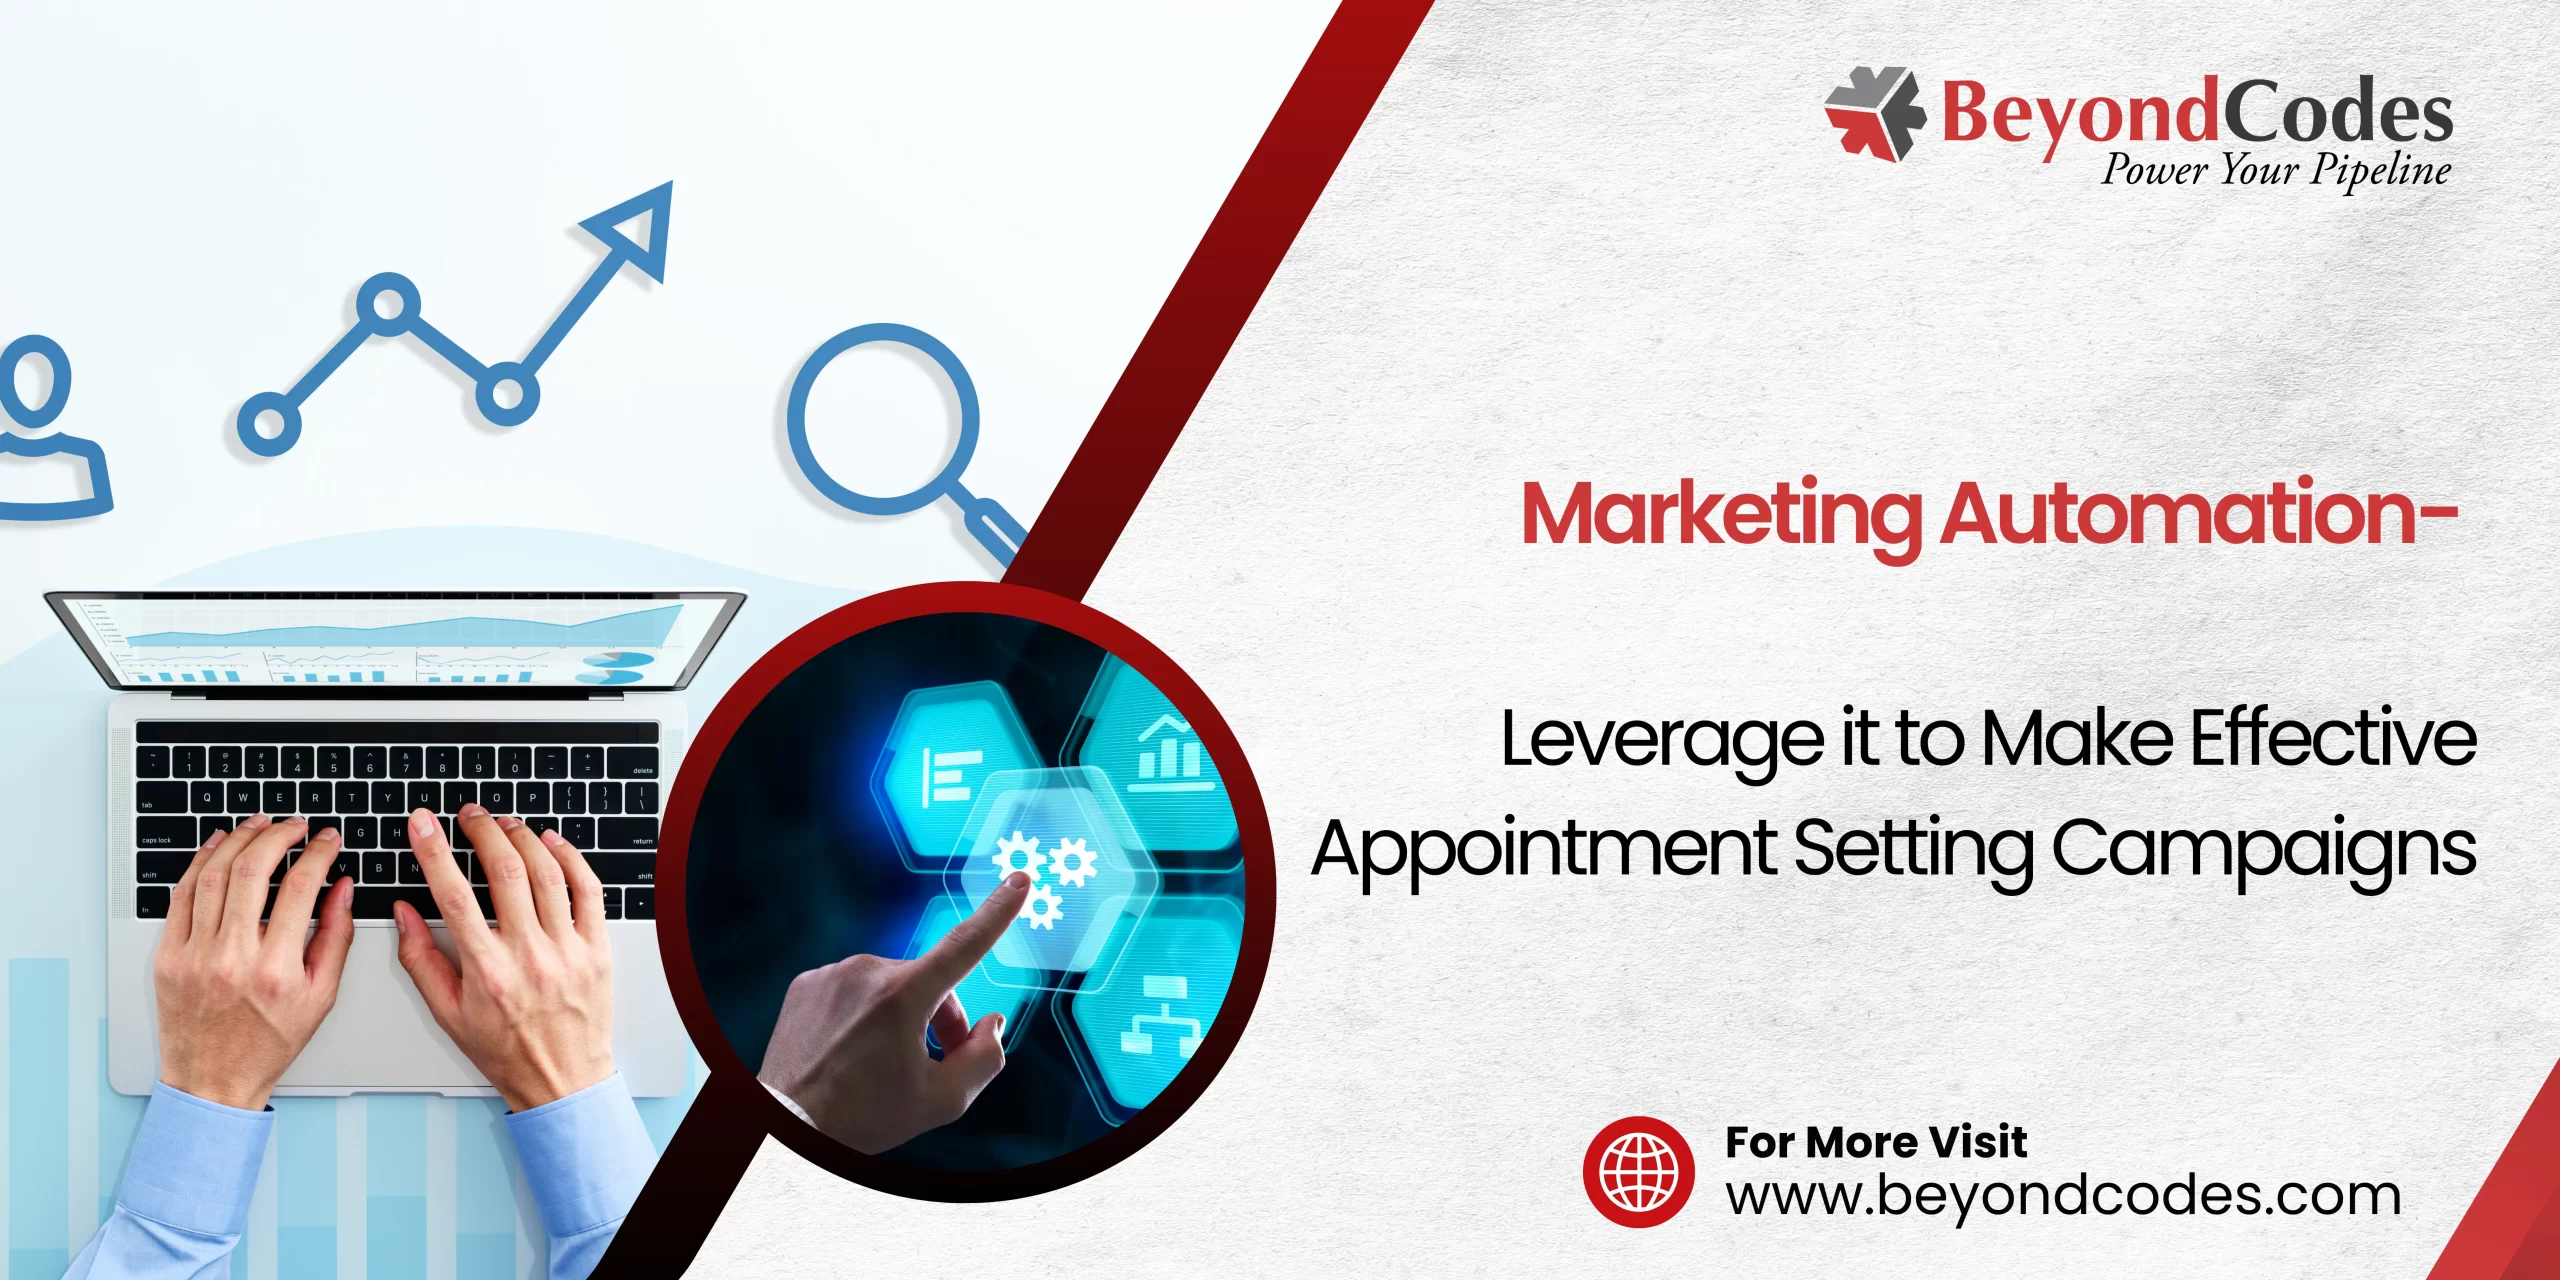 Marketing Automation- Leverage it to Make Effective Appointment Setting Campaigns